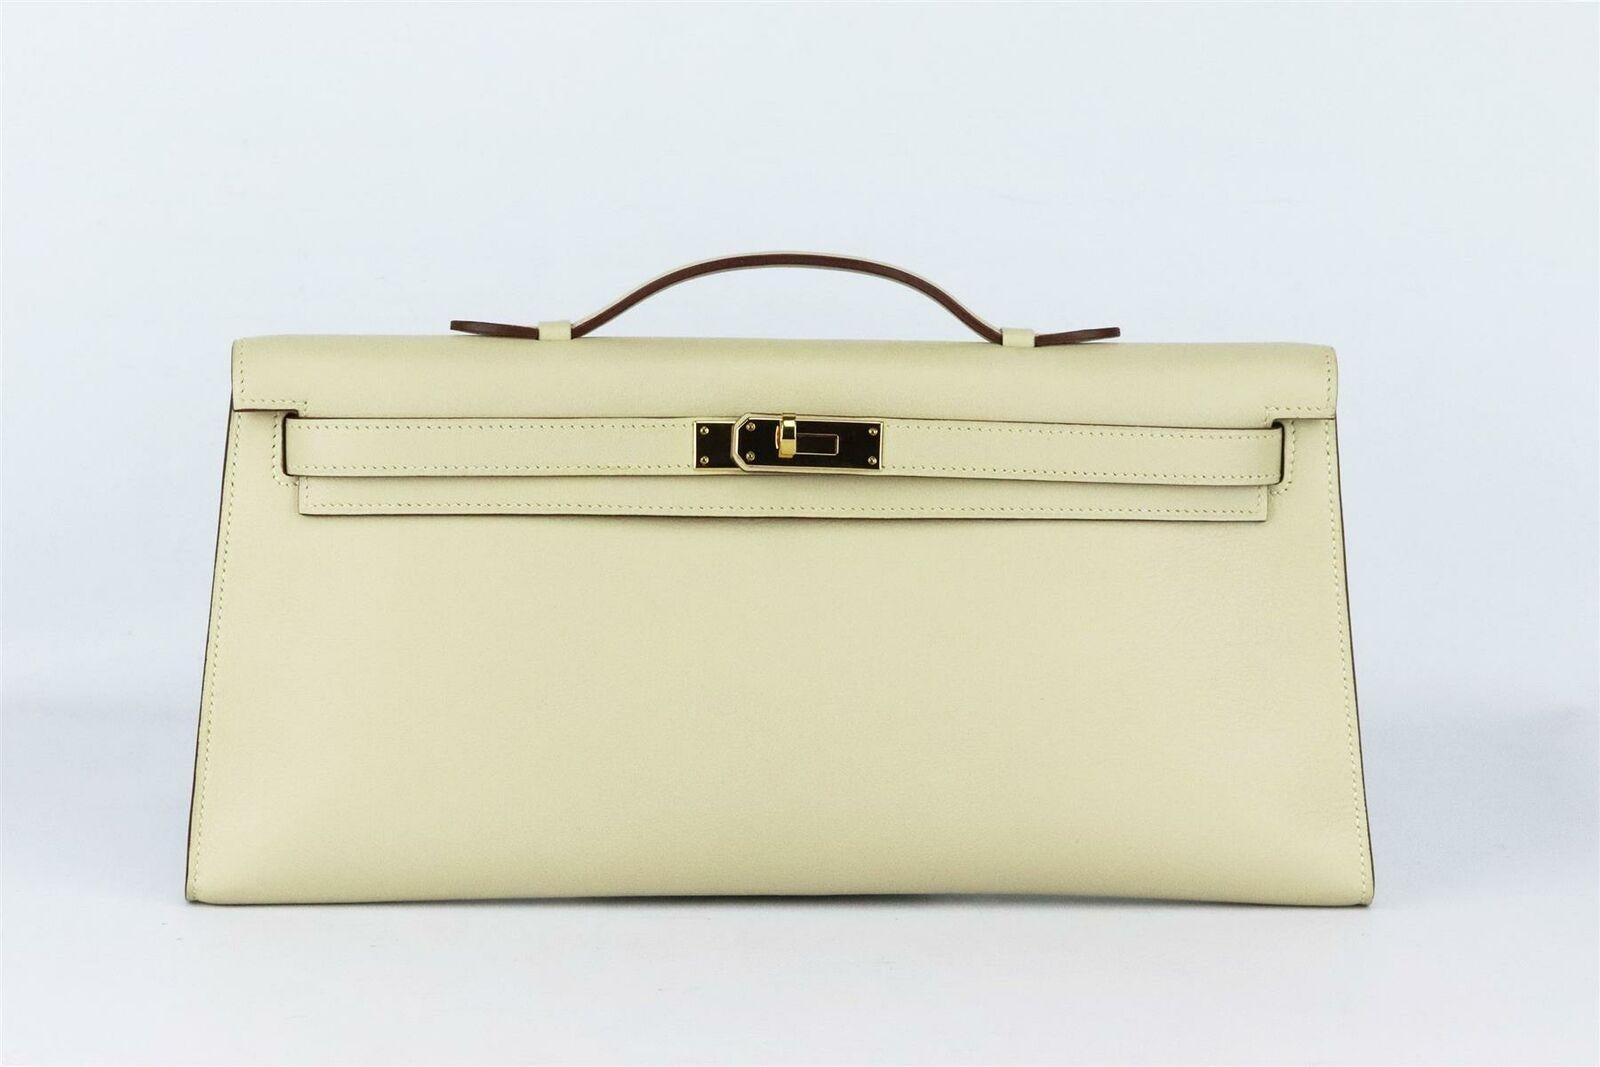 Made in France, this beautiful 2008 Hermès ‘Kelly Longue’ clutch bag has been made from ‘Swift’ leather in a subtle light beige hue and matching leather interior, this piece is decorated with gold hardware on the front and finished with top